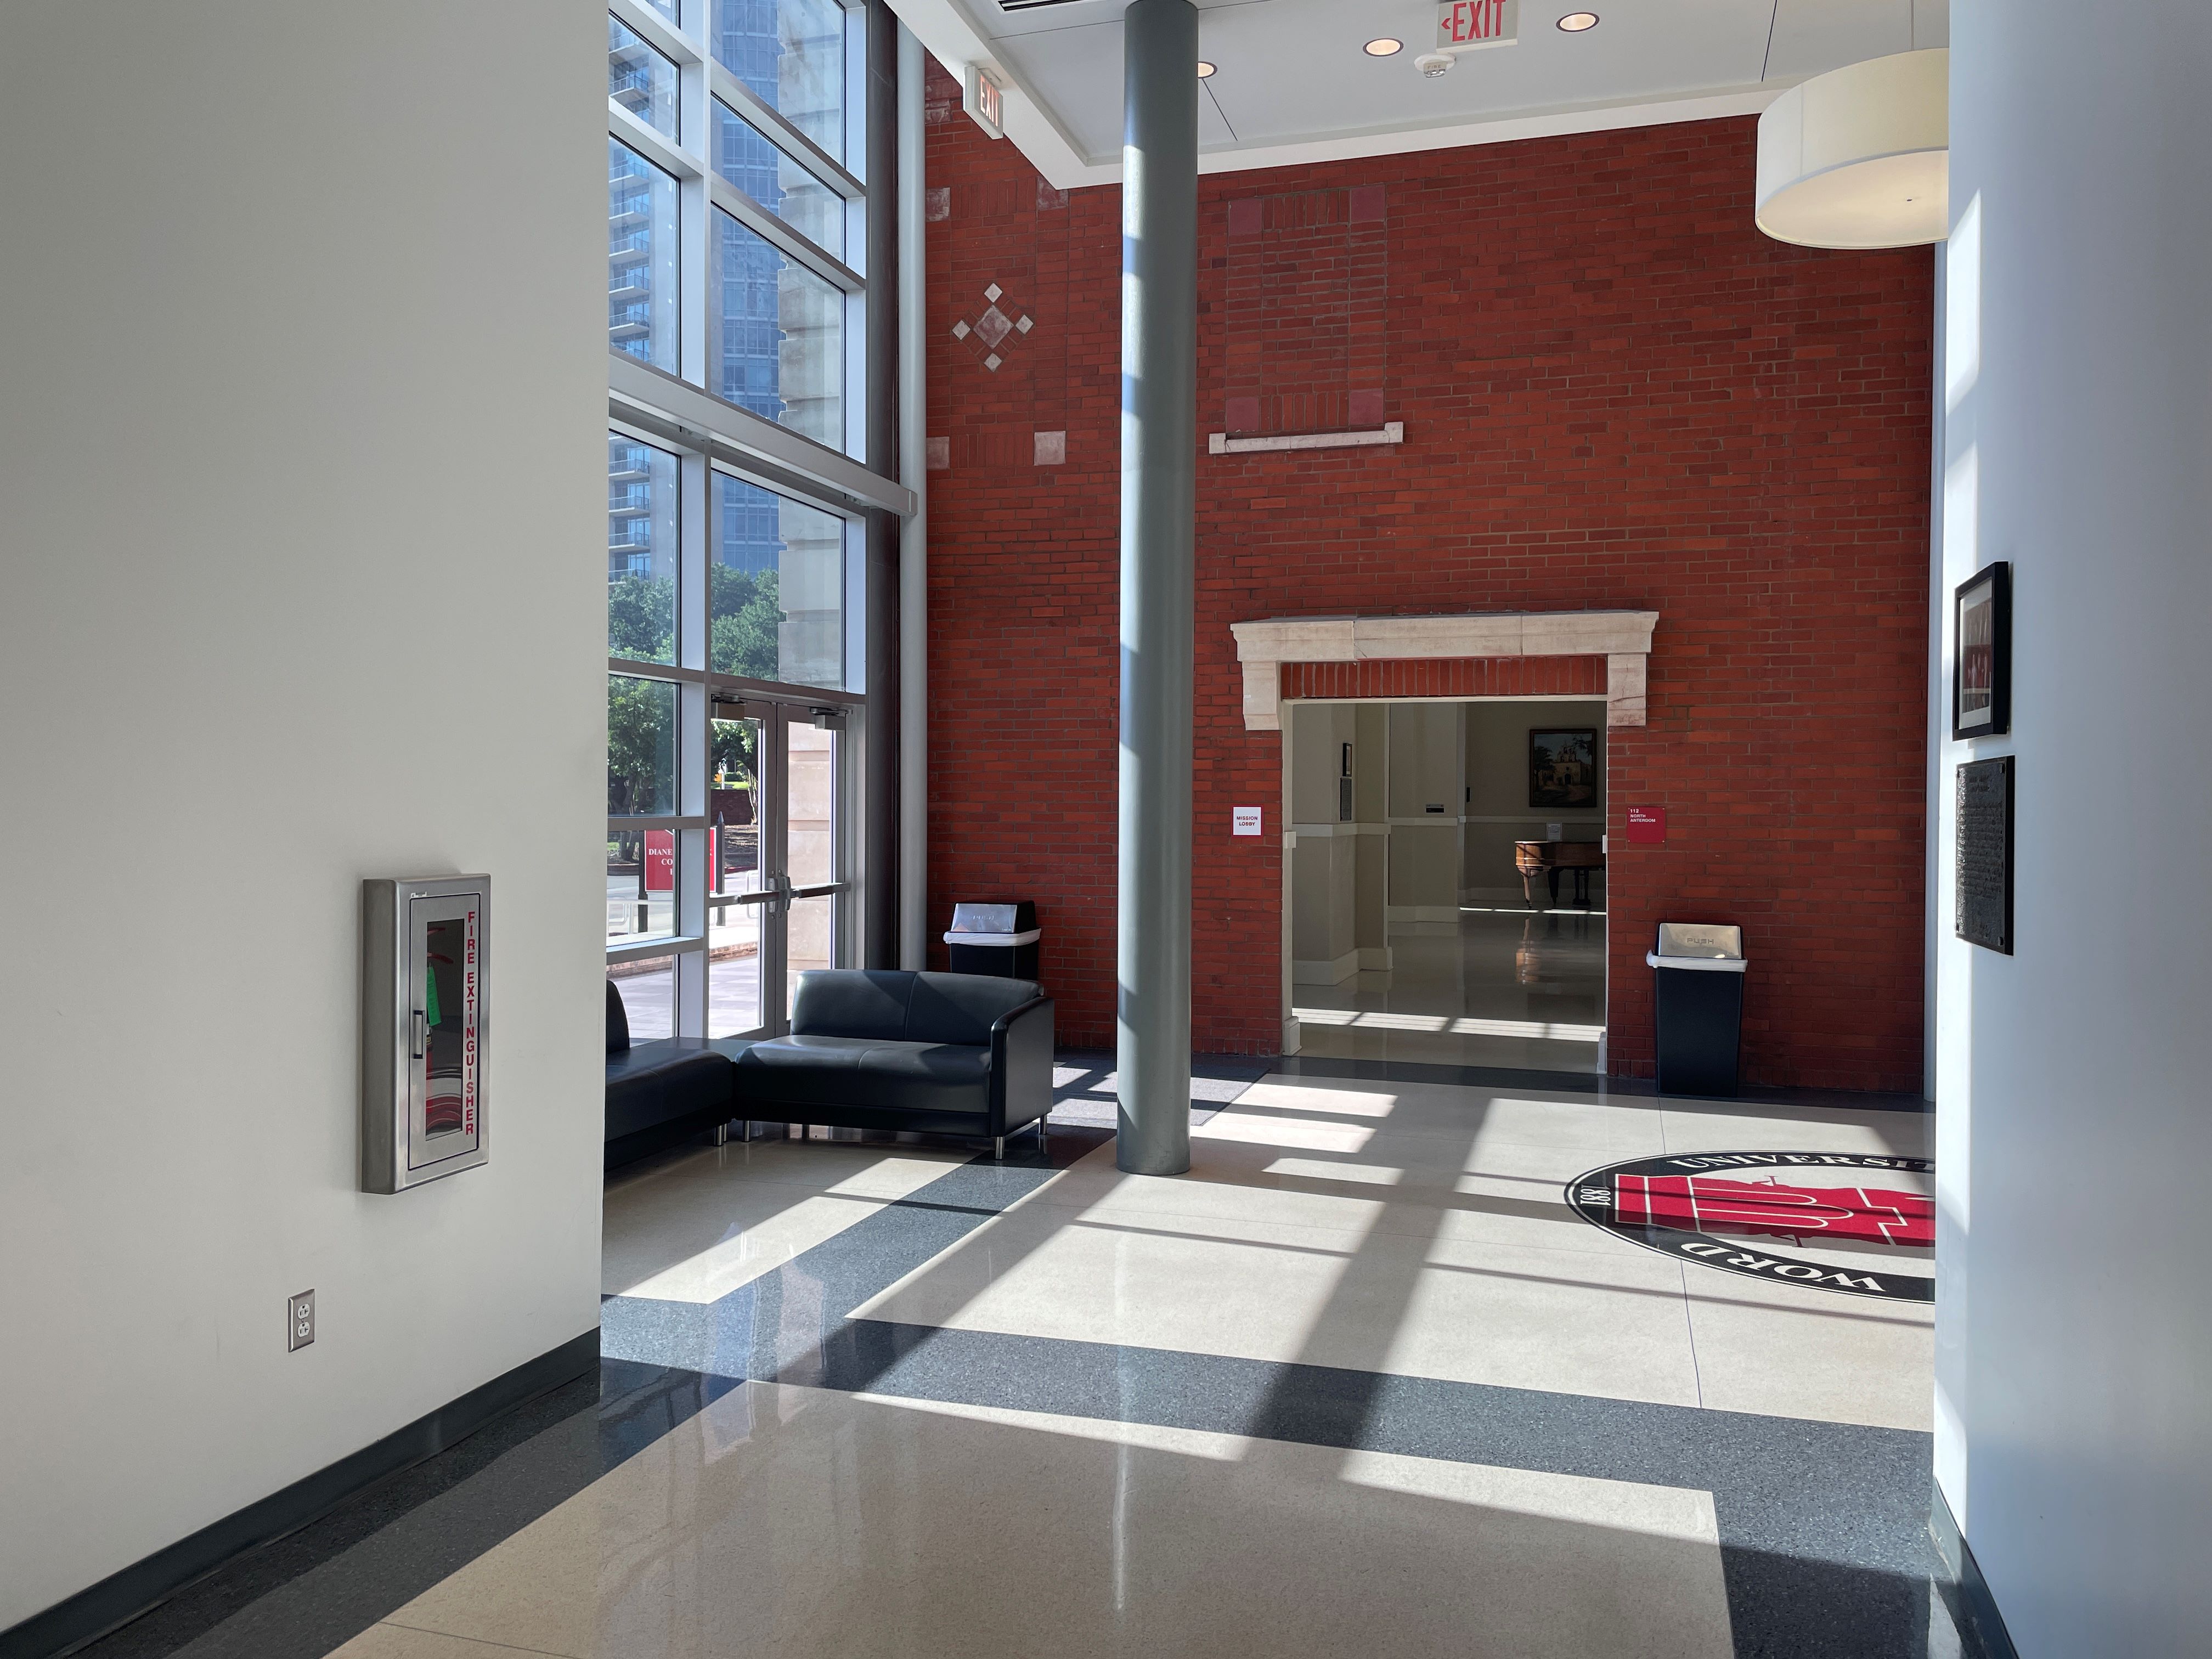 Picture of music lobby on the first floor